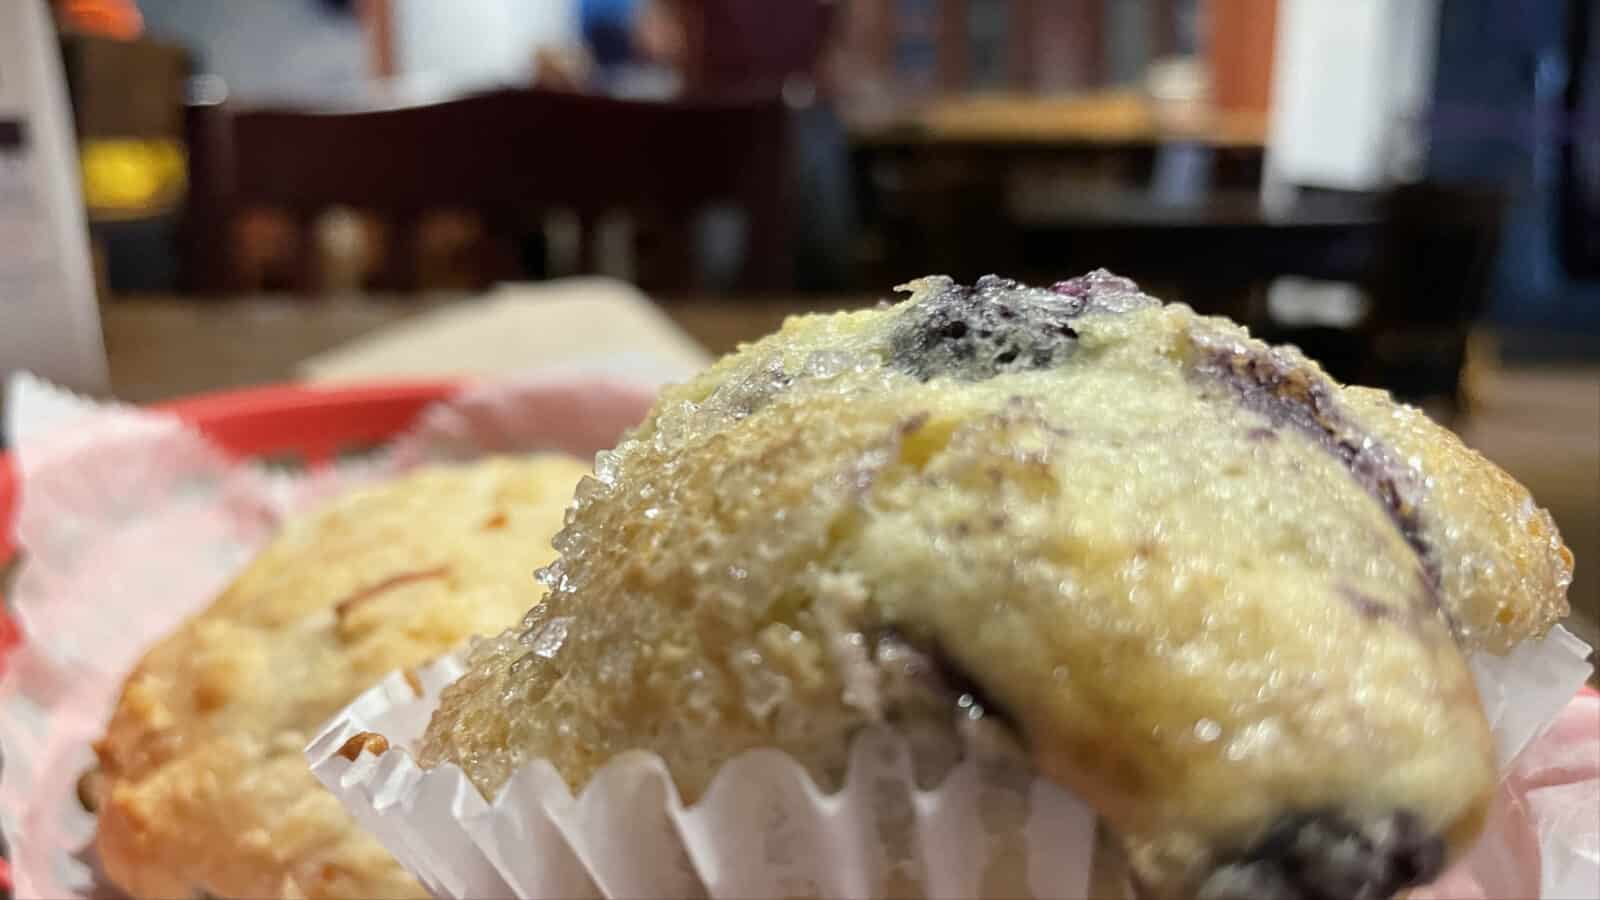 A blueberry muffin glistens with sugar at Dottie's Coffee Lounge.